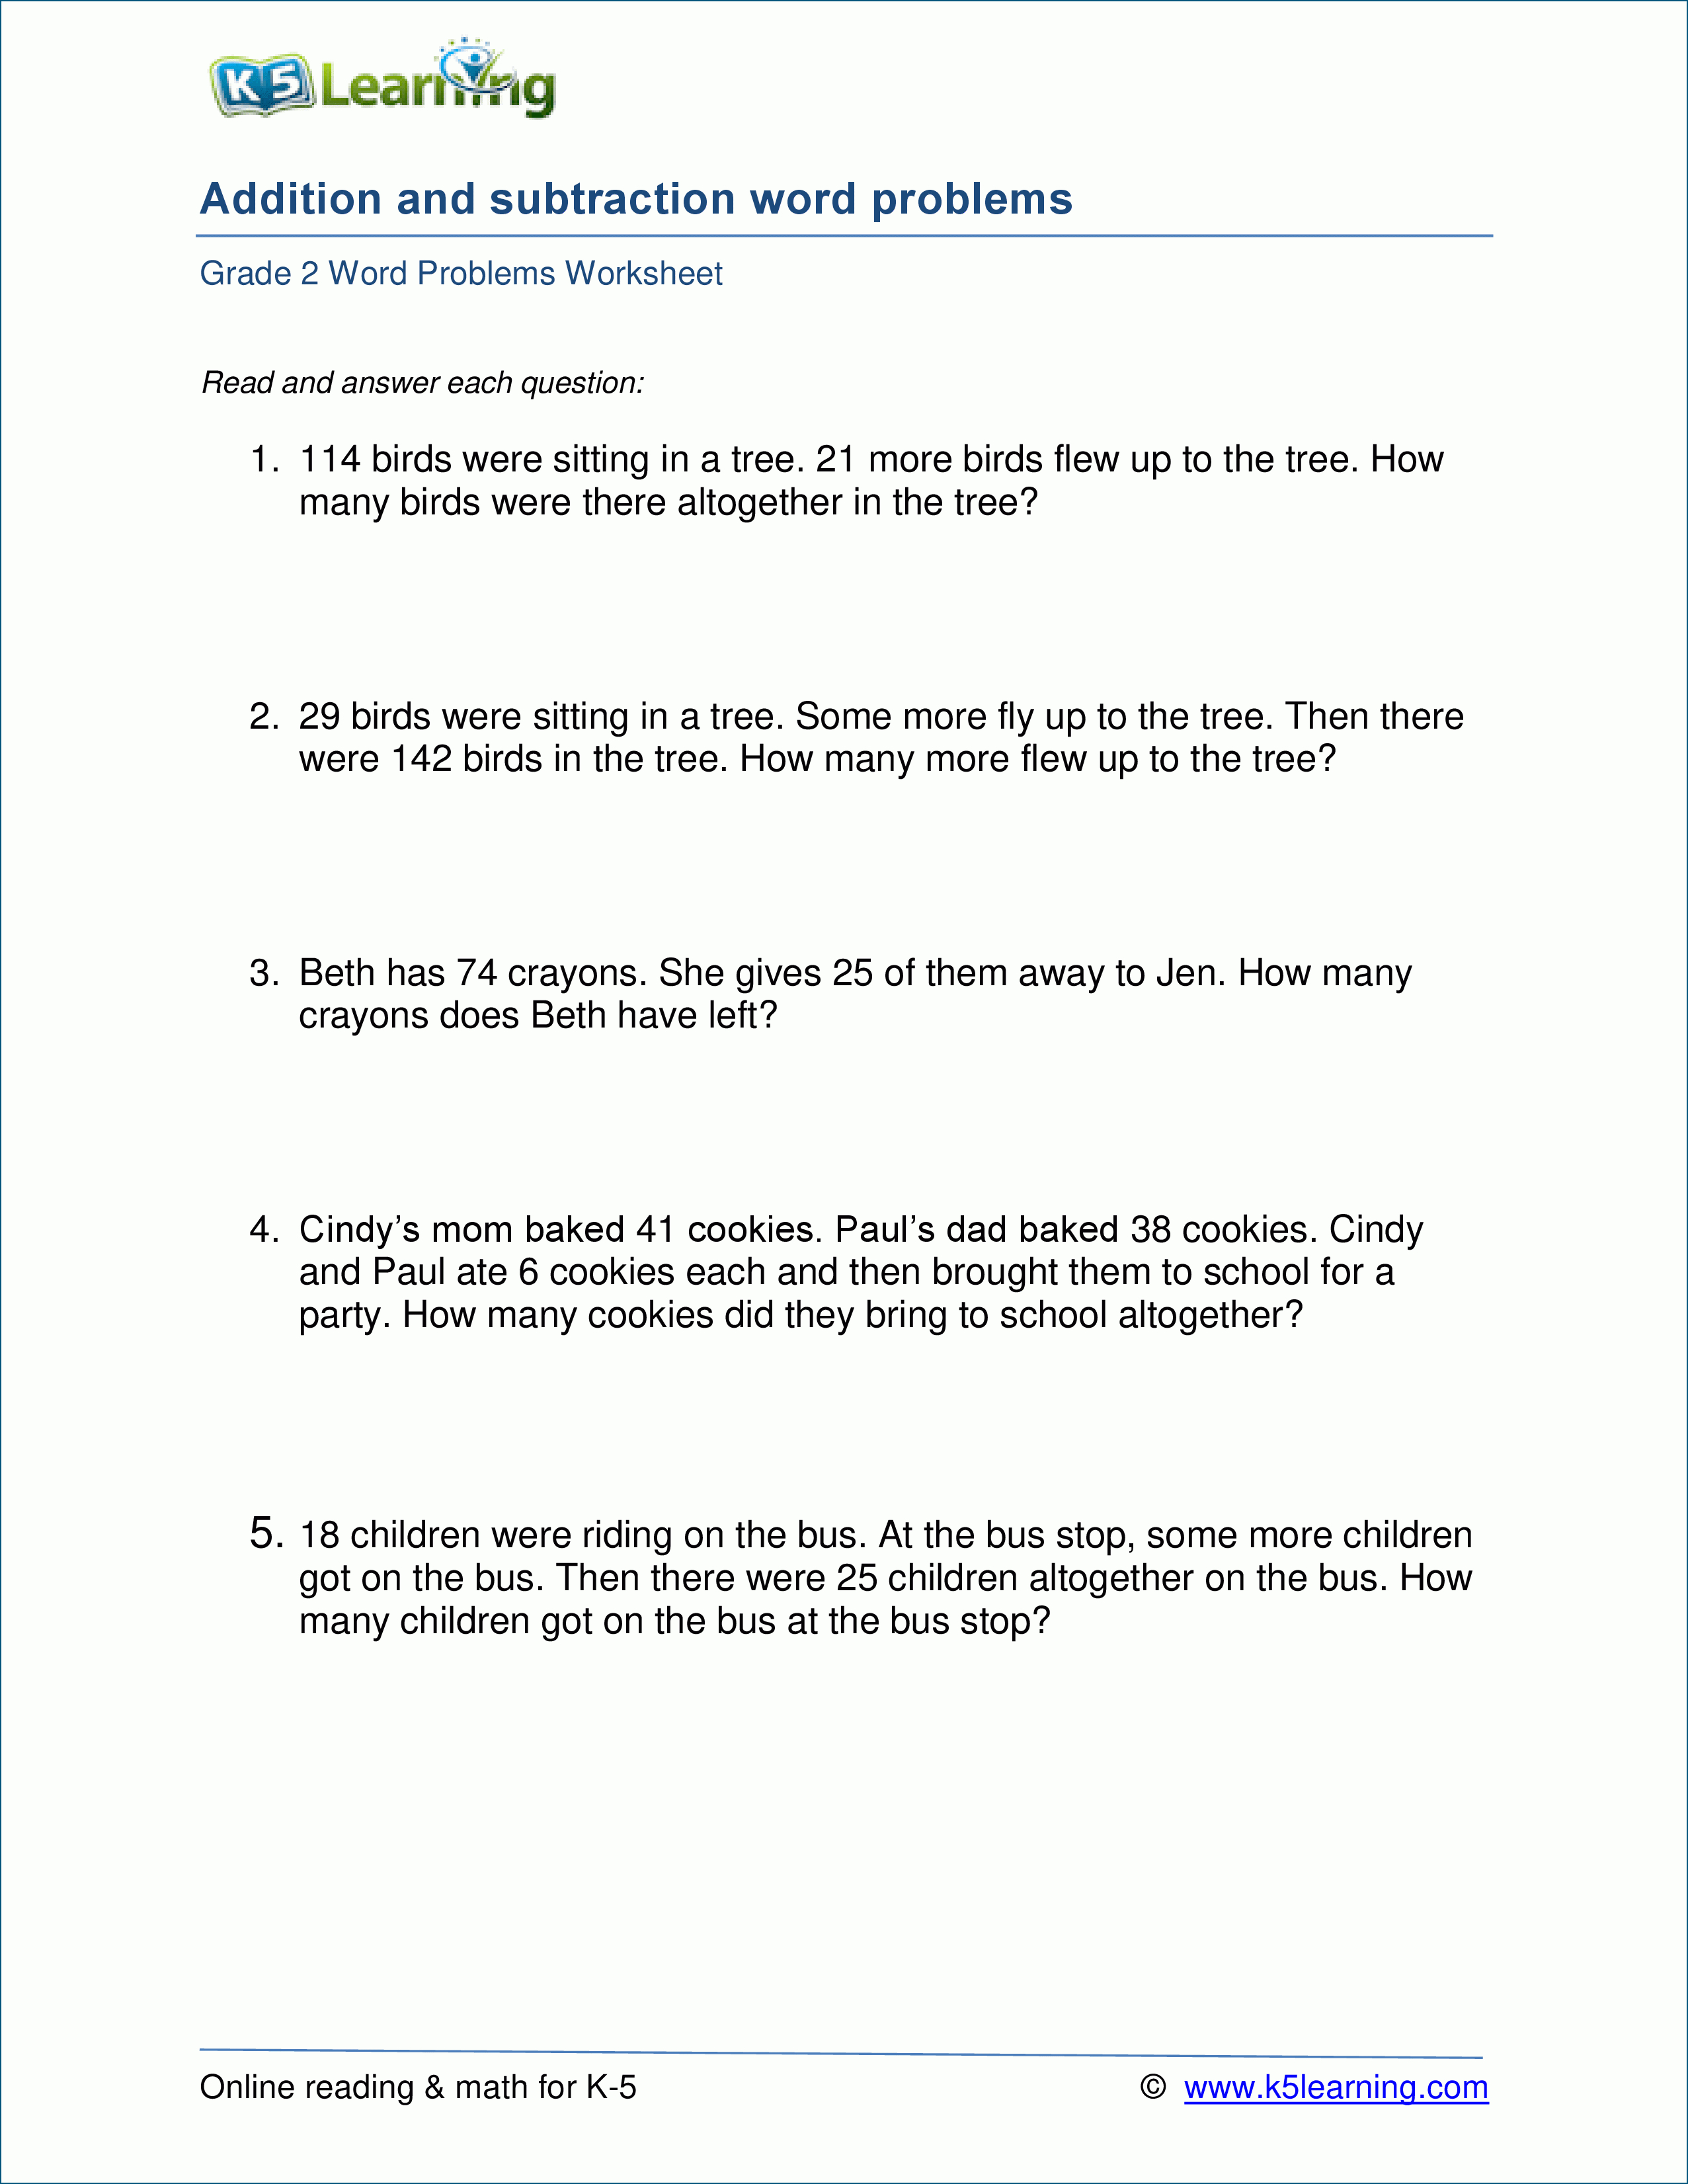 k 5 learning worksheets db excelcom